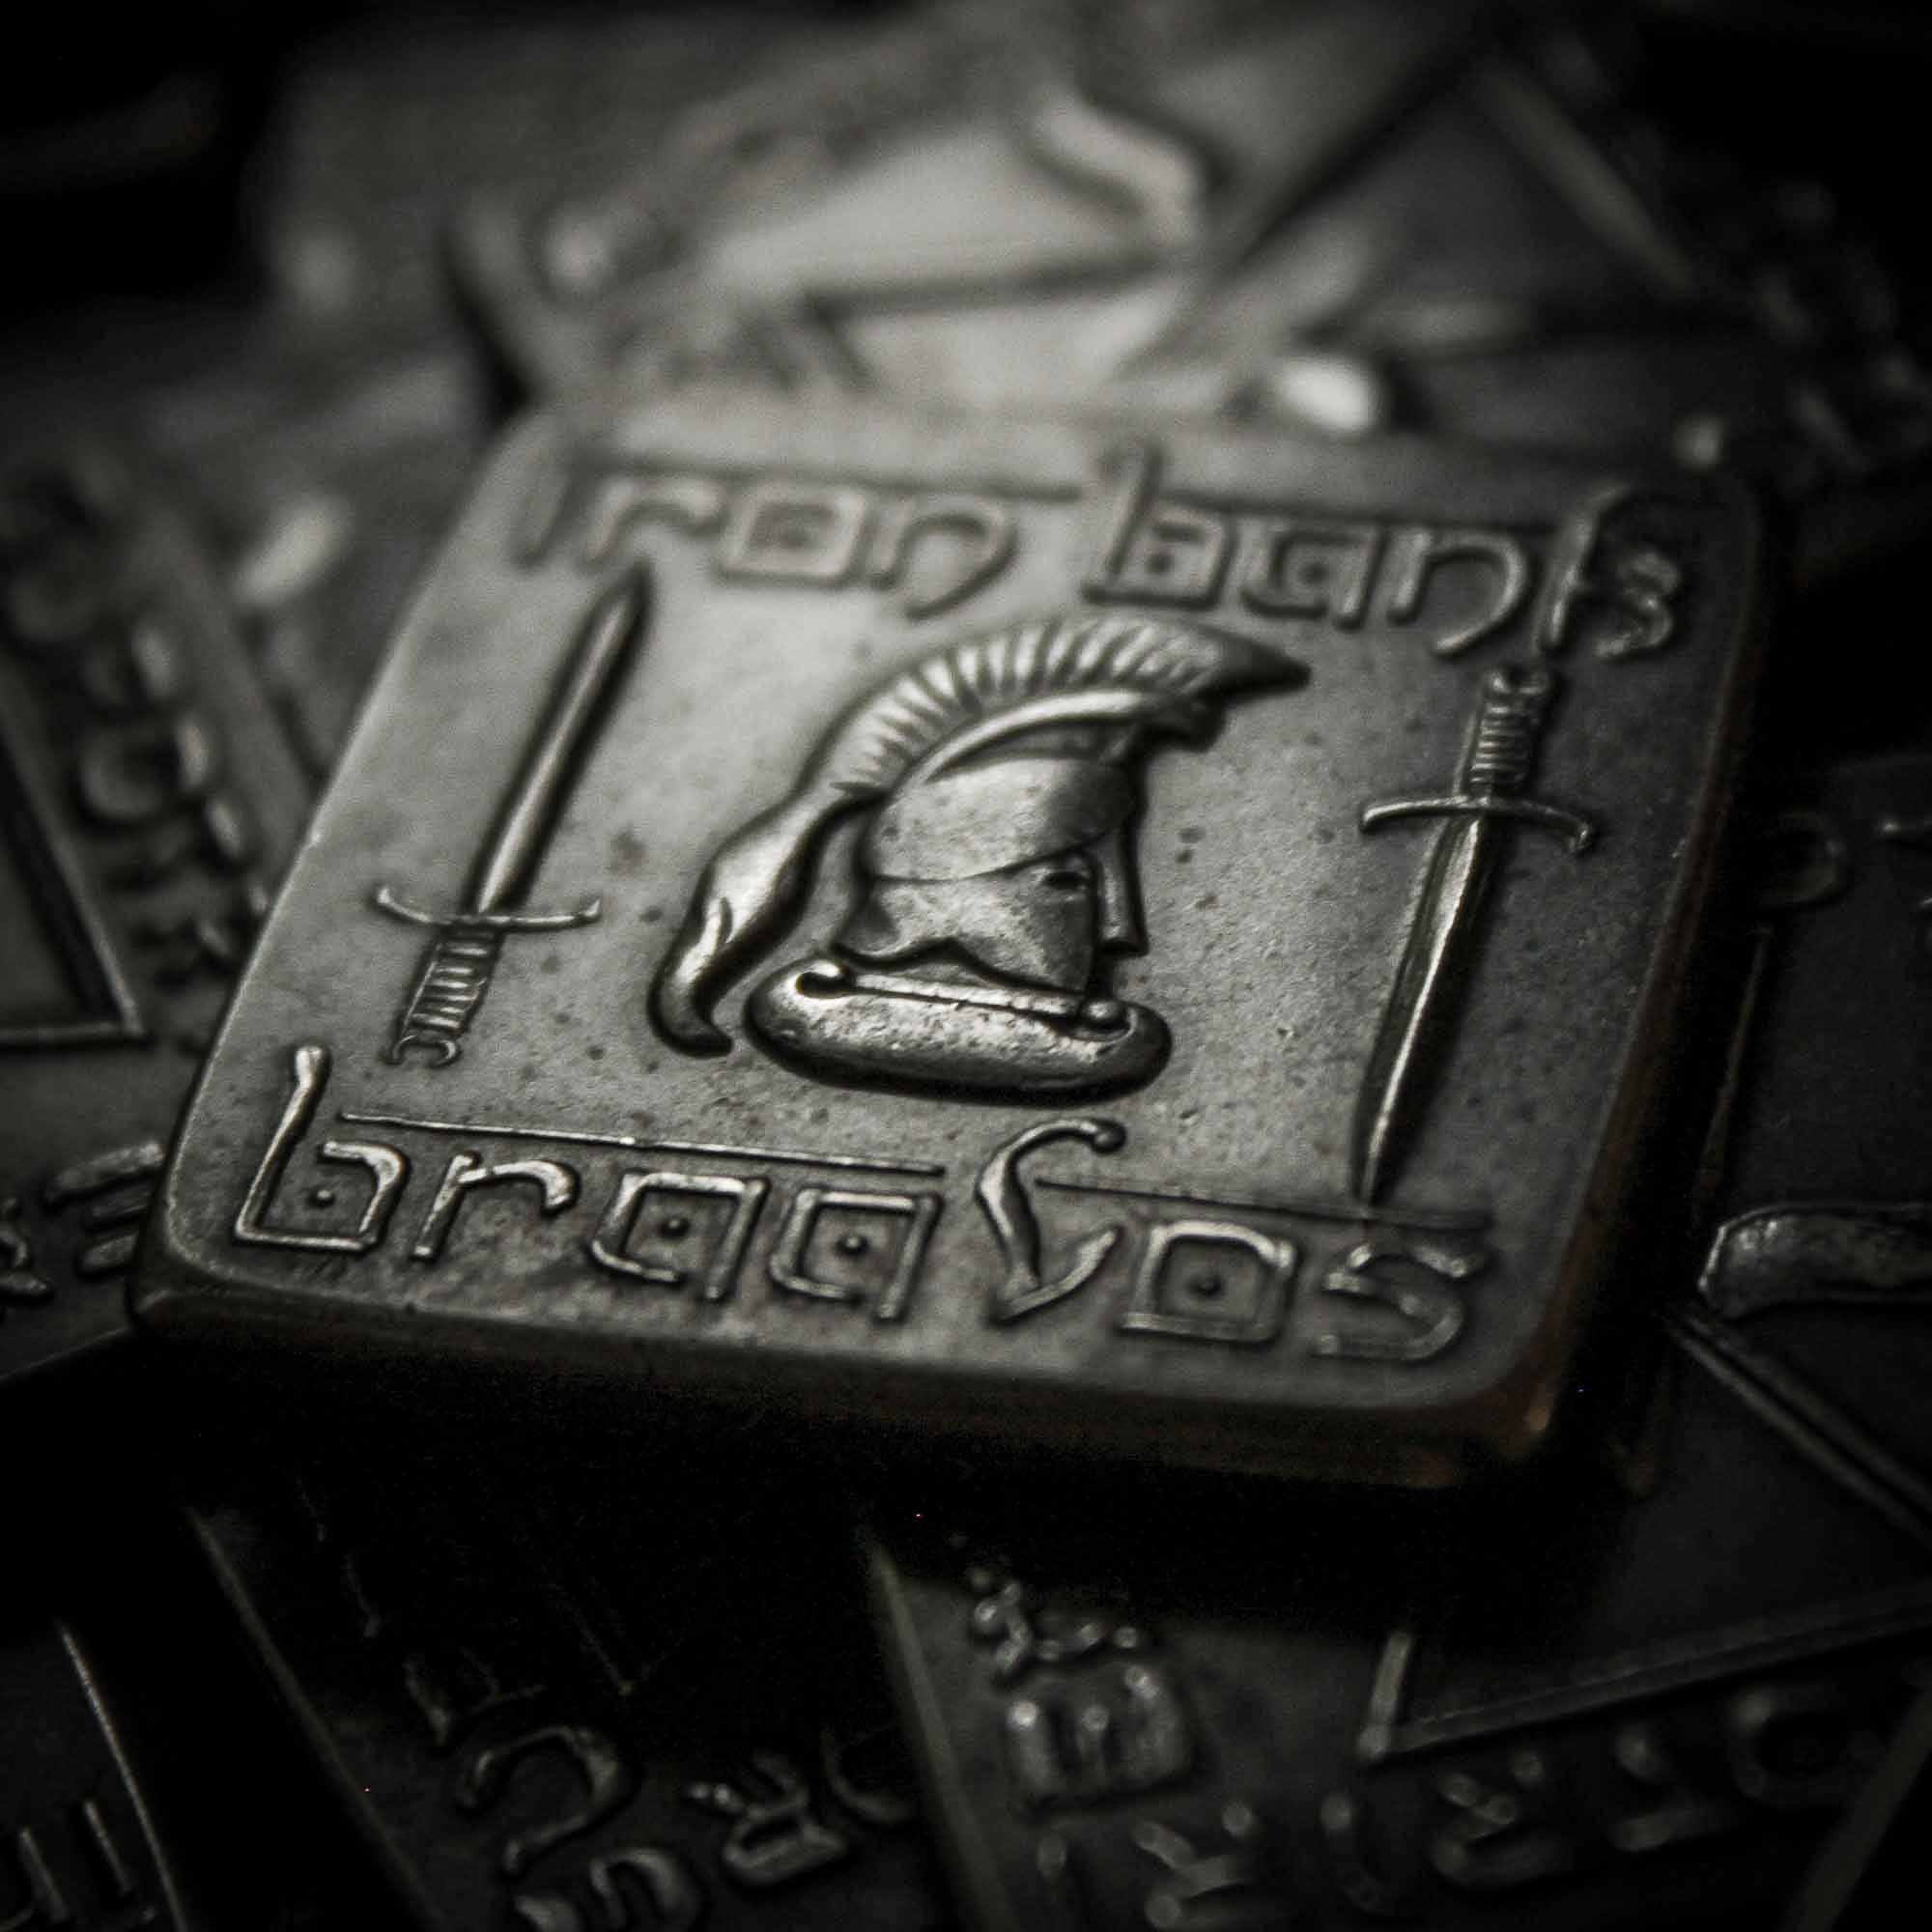 Braavosi Iron Square - Valar Morghulis - Official Coin of Essos by Shire Post Mint